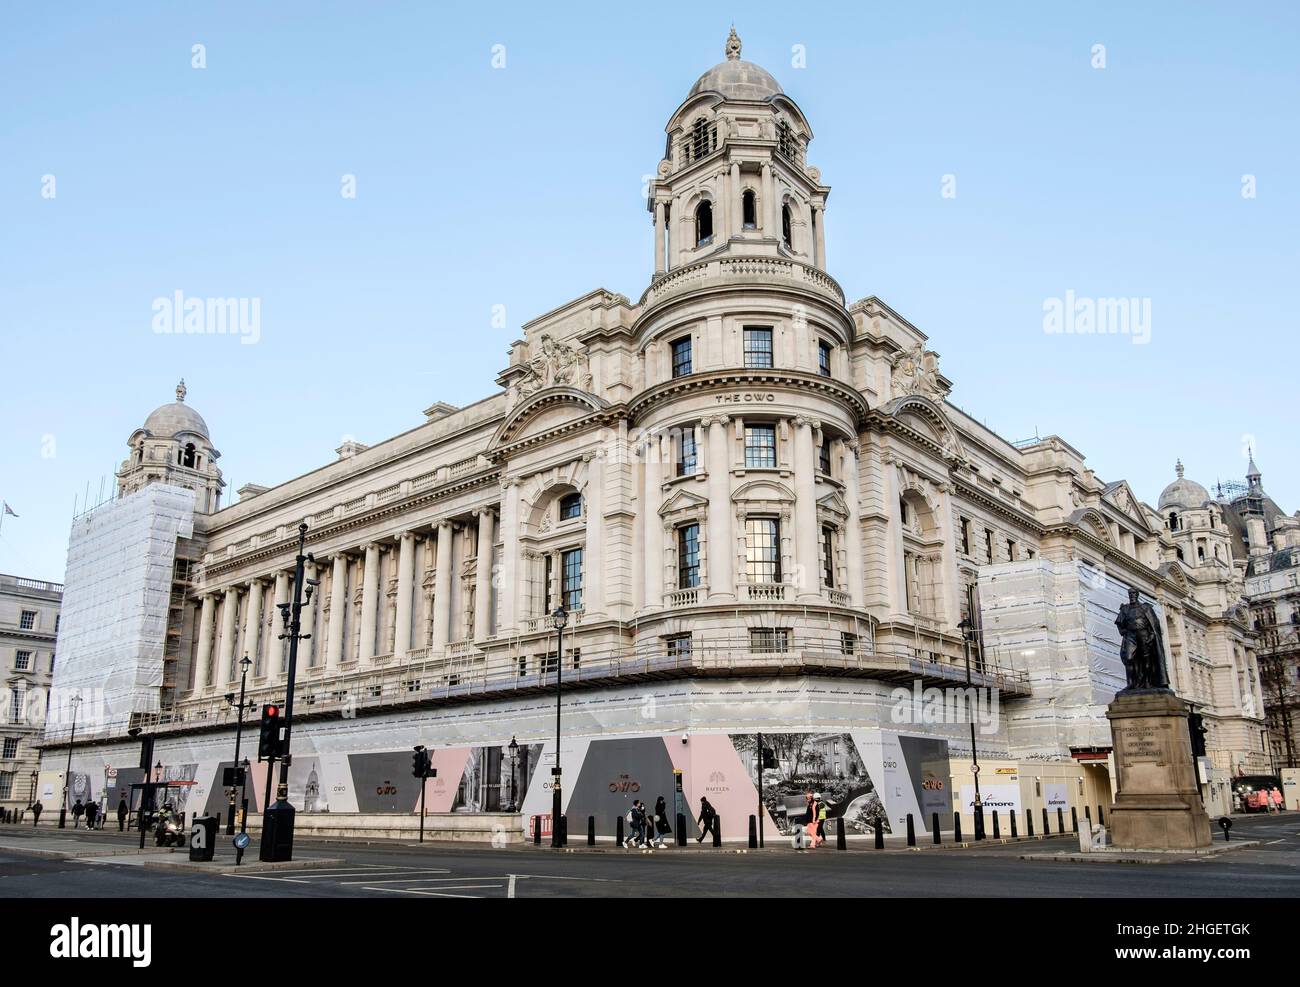 The OWO Residences development in the former British government War Office buildings scheduled for opening in 2022, Whitehall, London, UK. Stock Photo